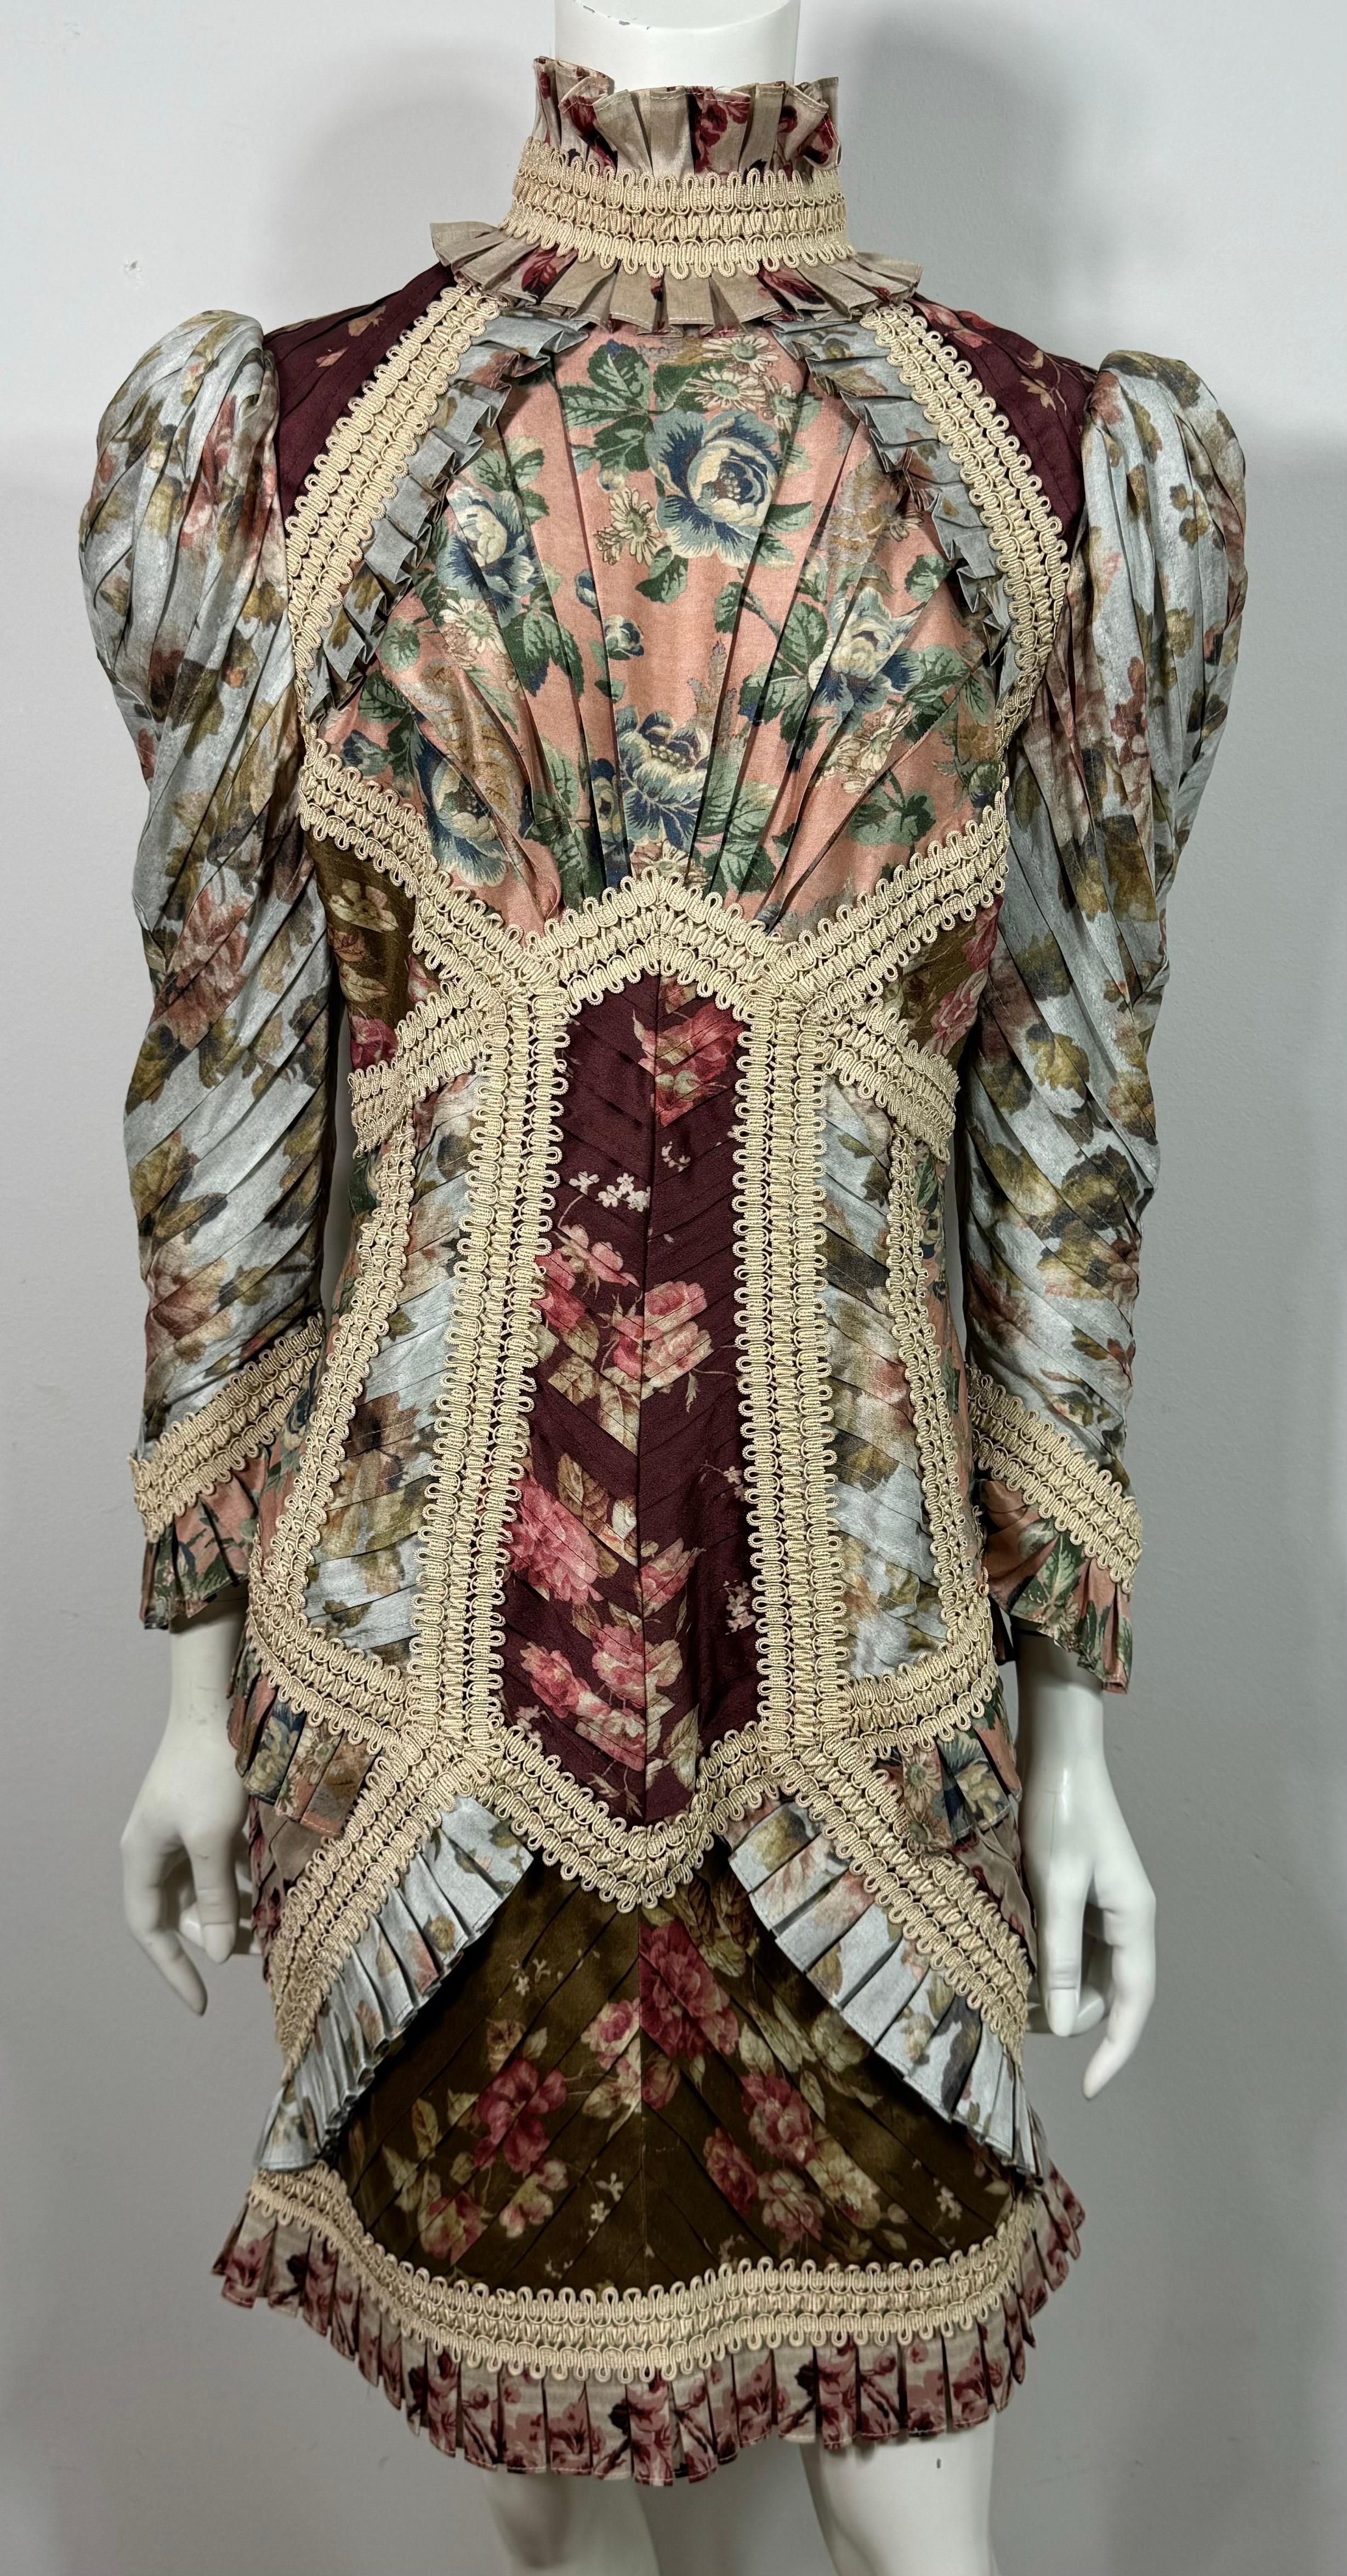 Zimmermann Runway Fall 2018 Floral and Soutache Lace High Neck Dress-Size 2/US 8 In Excellent Condition For Sale In West Palm Beach, FL